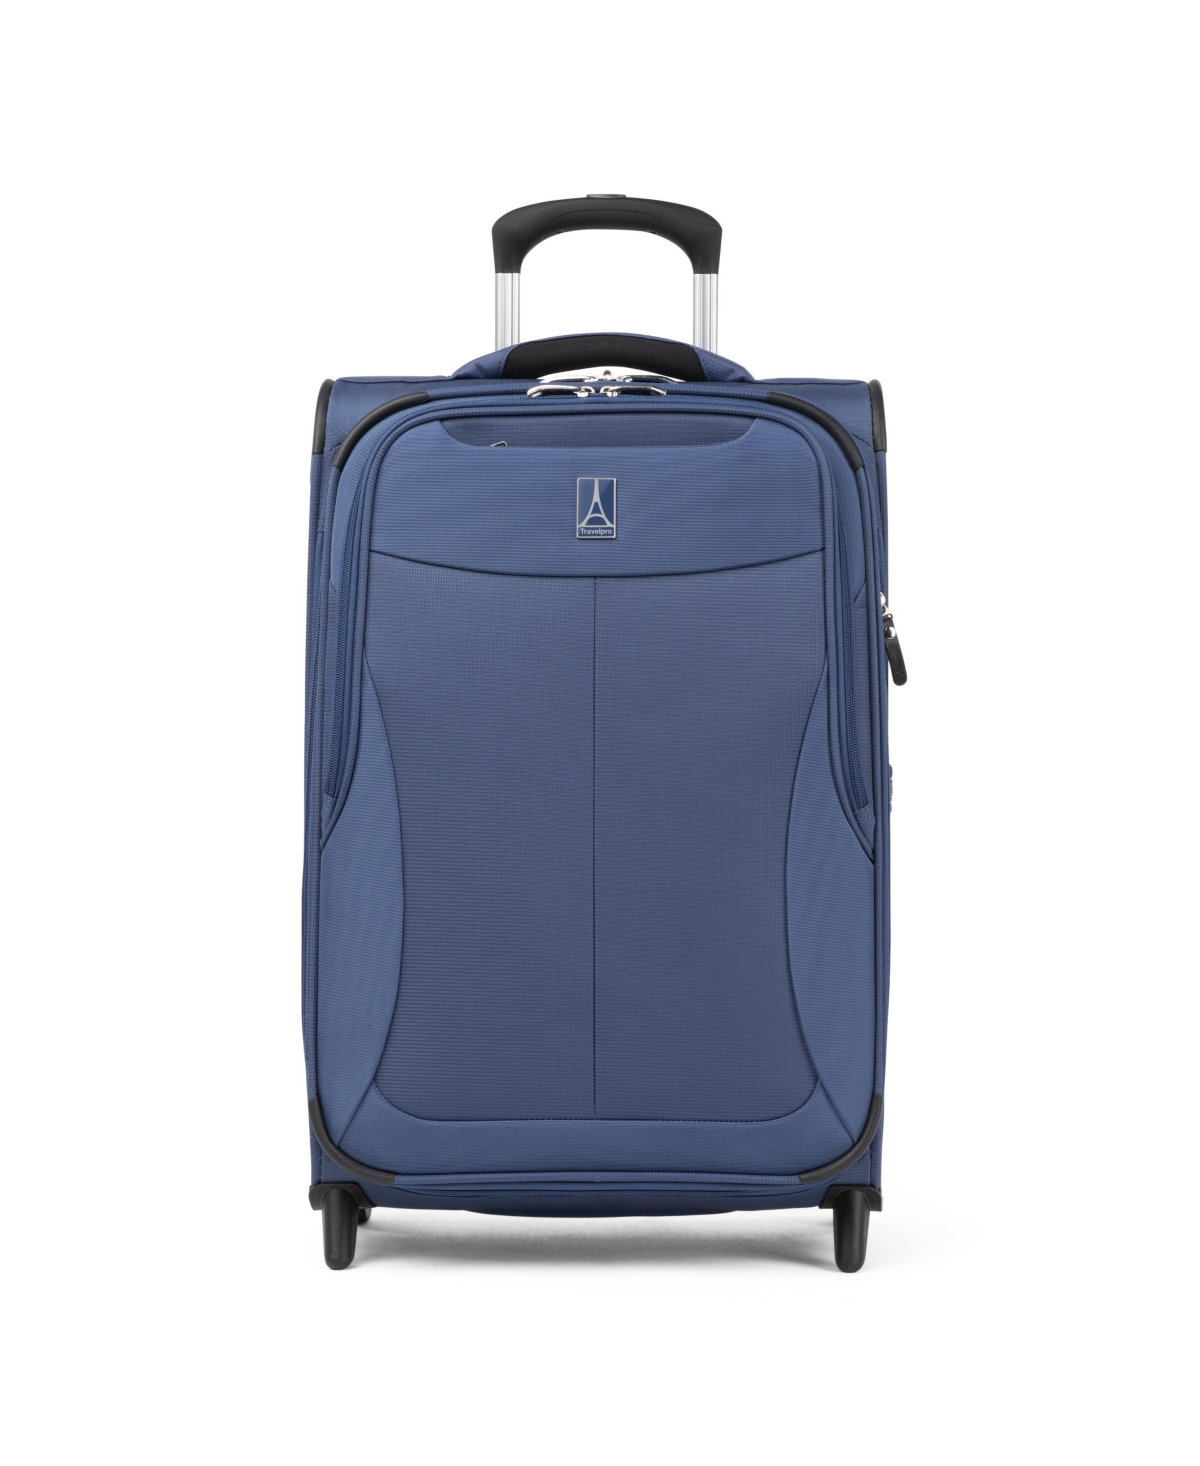 Travelpro Walkabout 6 Carry-on Exp Rollaboard In Ocean Blue